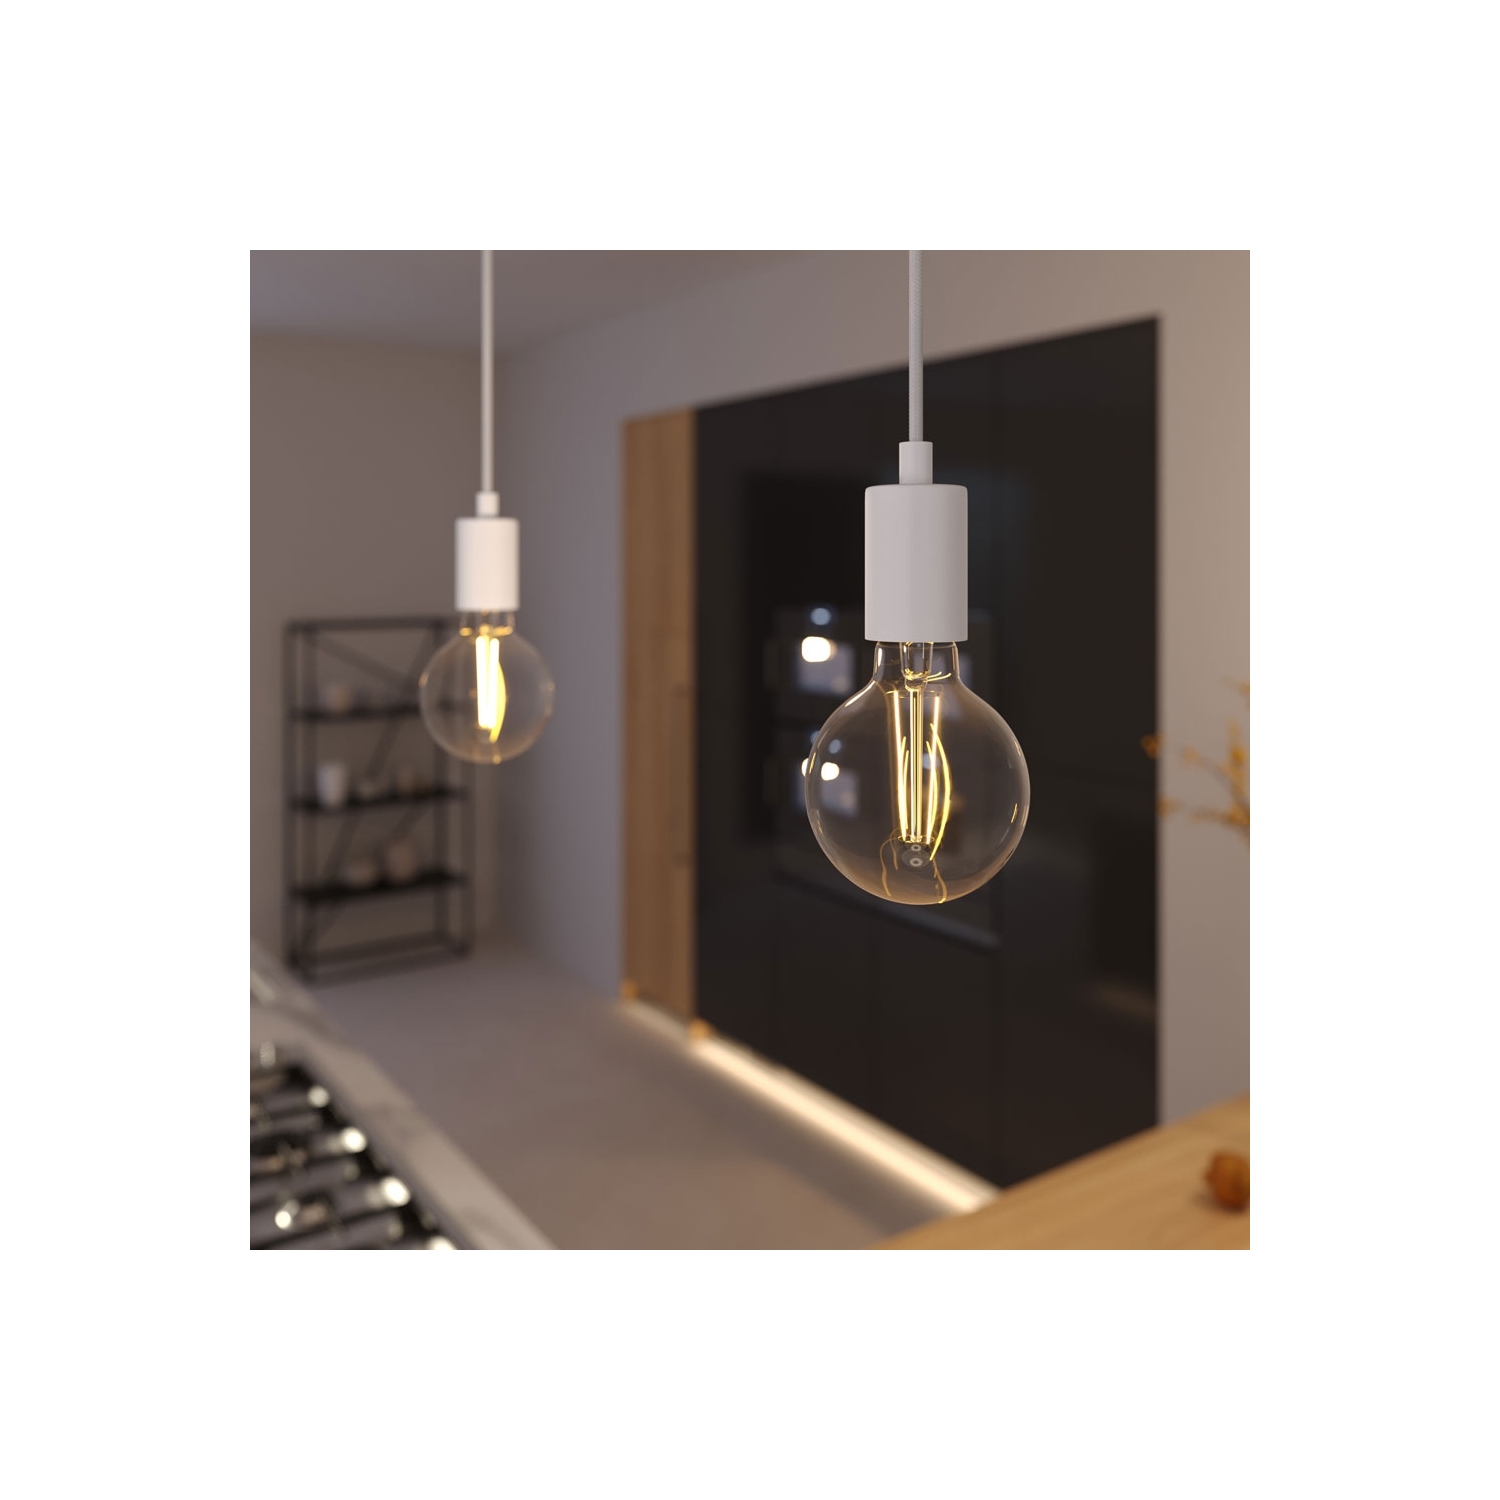 Pendant lamp with textile cable and monochrome metal details